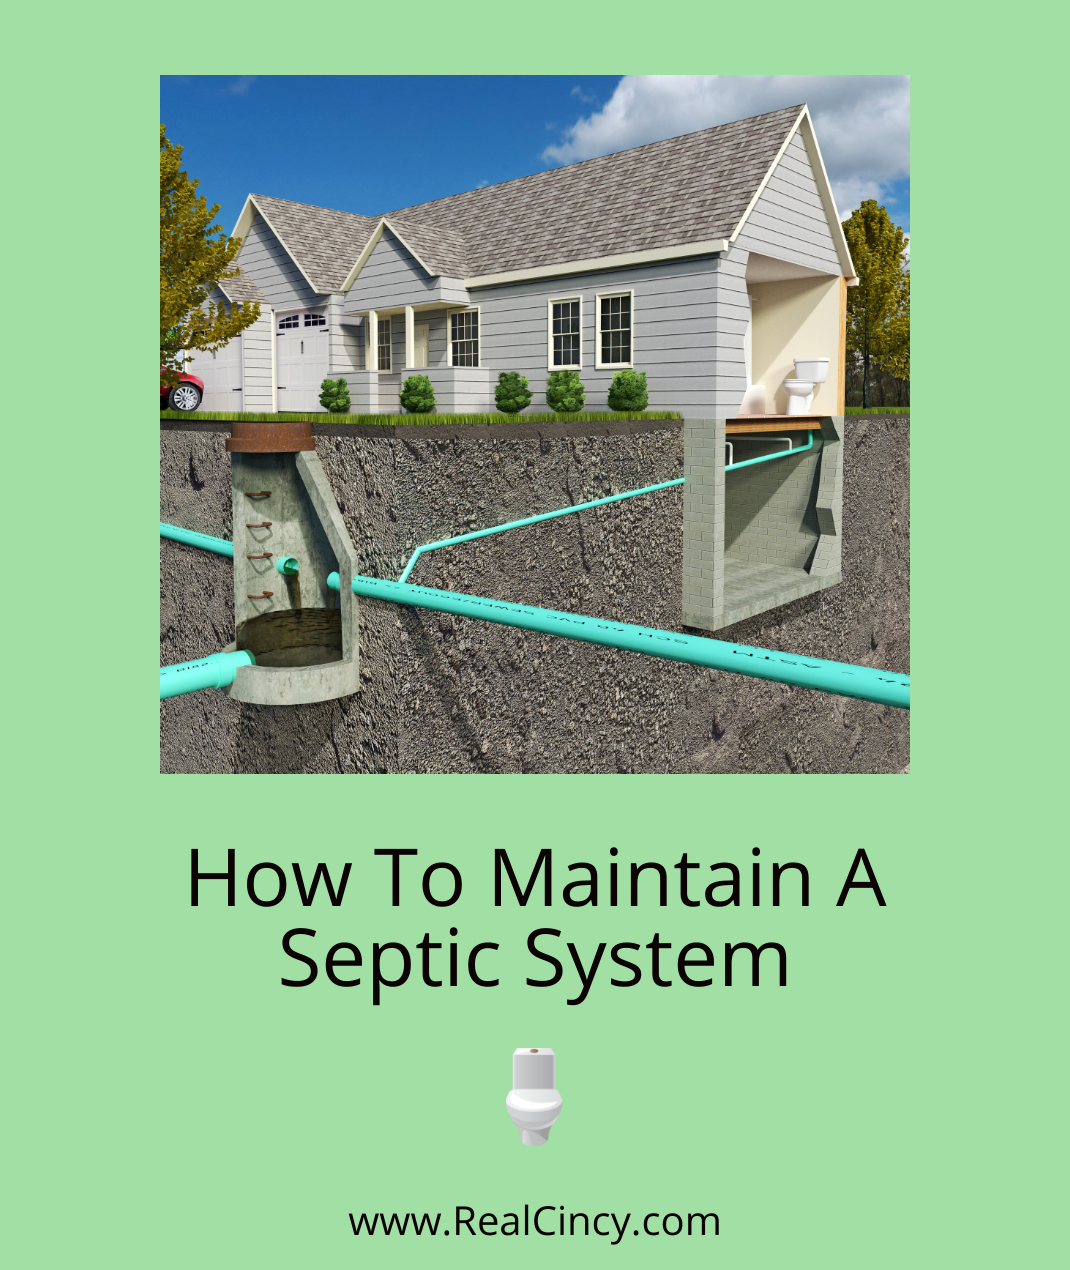 How To Maintain A Septic System